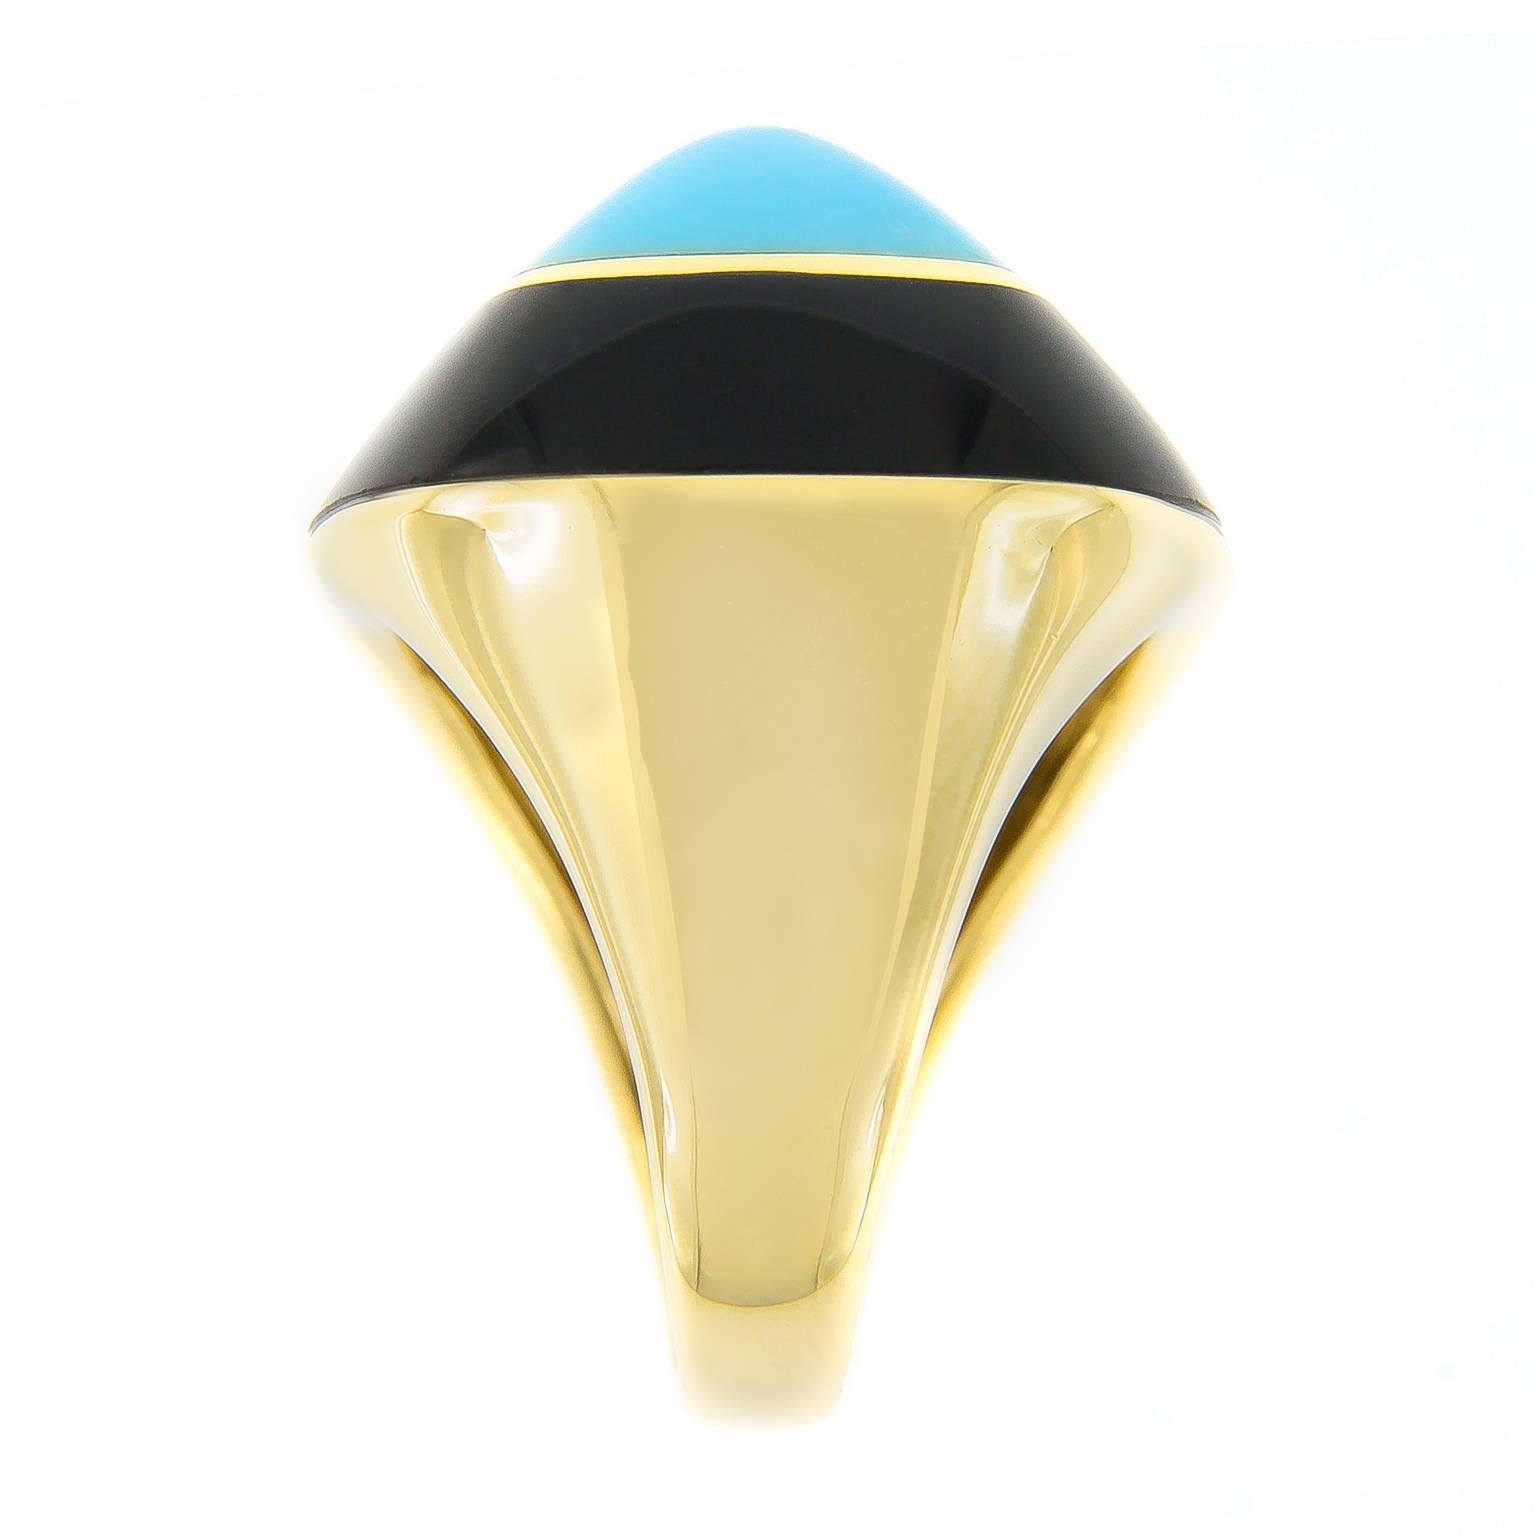 Make a bold statement with this fabulous 18k yellow gold ring made for Campanelli & Pear by Molina. Retro in style, this pyramidal ring features a Persian Turquoise center stone surrounded by a band of black onyx.

Hallmarked Italy

Size 6; ring can